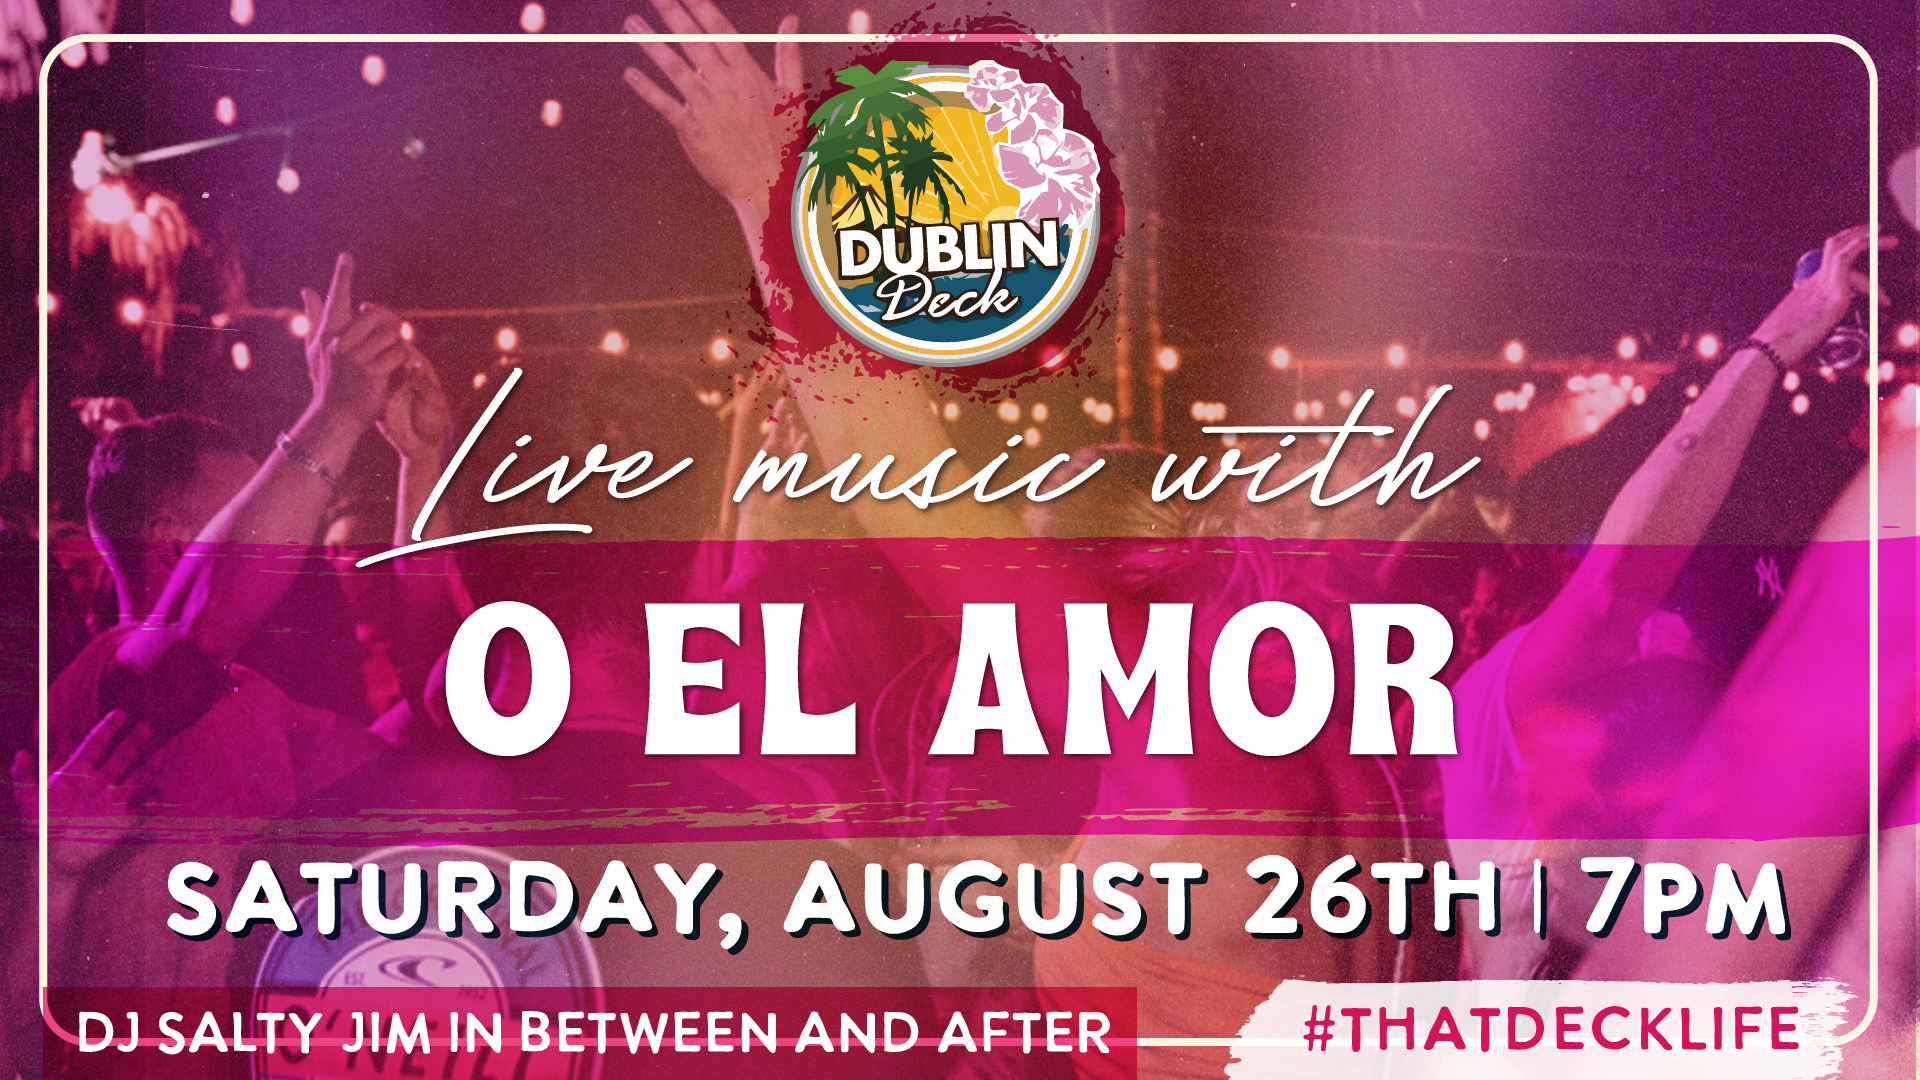 Spend your Saturday with O El Amor at Dublin Deck! Music begins at 7PM